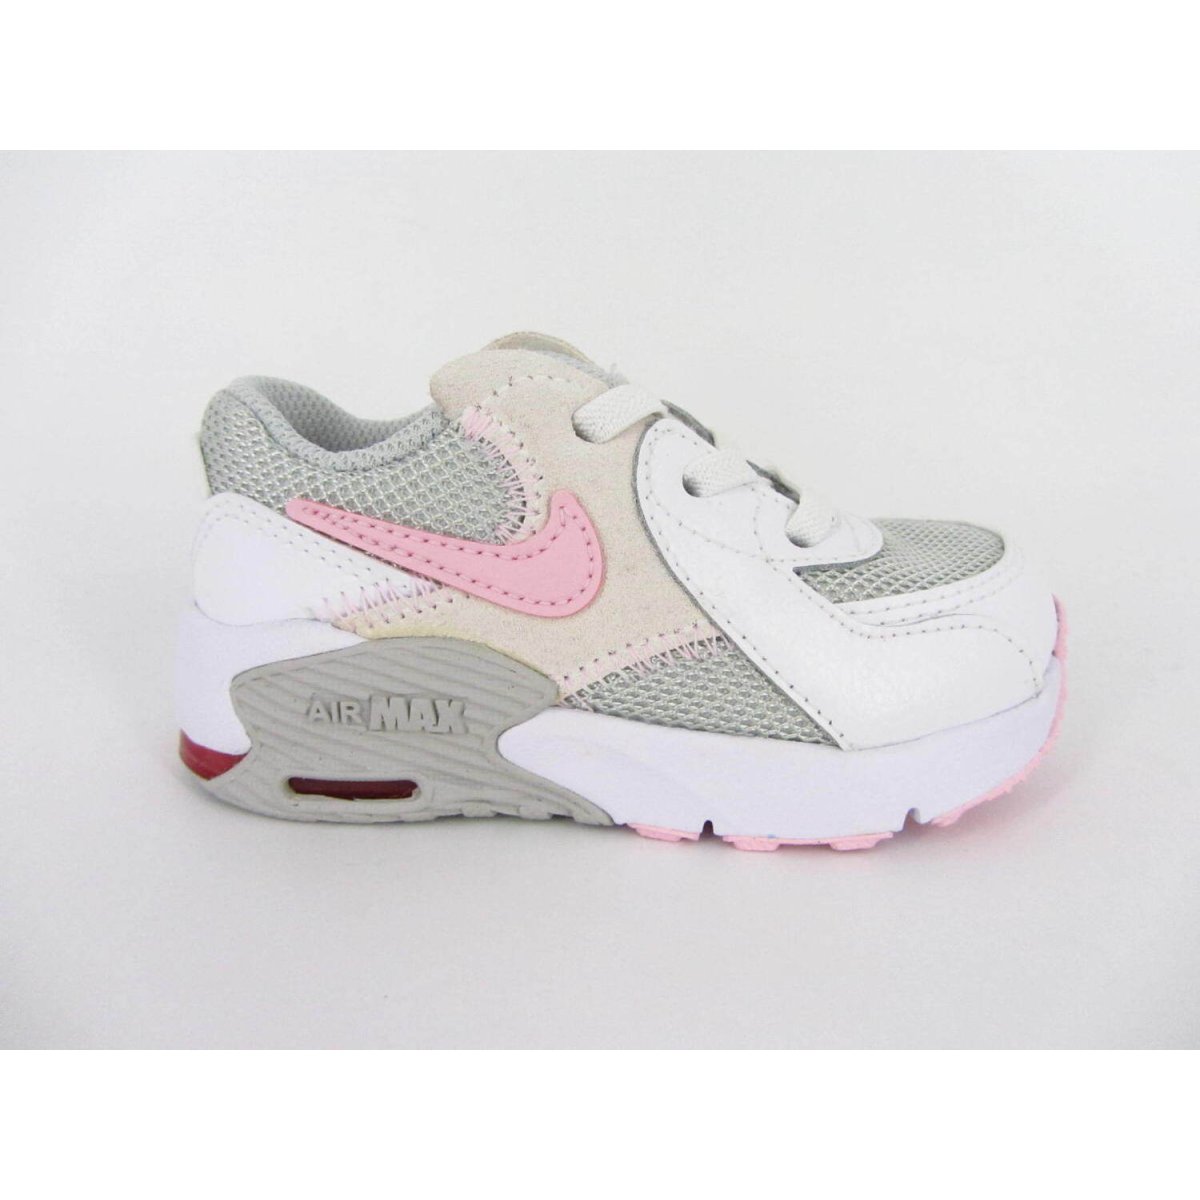 Nike Air Max Excee Scarpa Sportiva